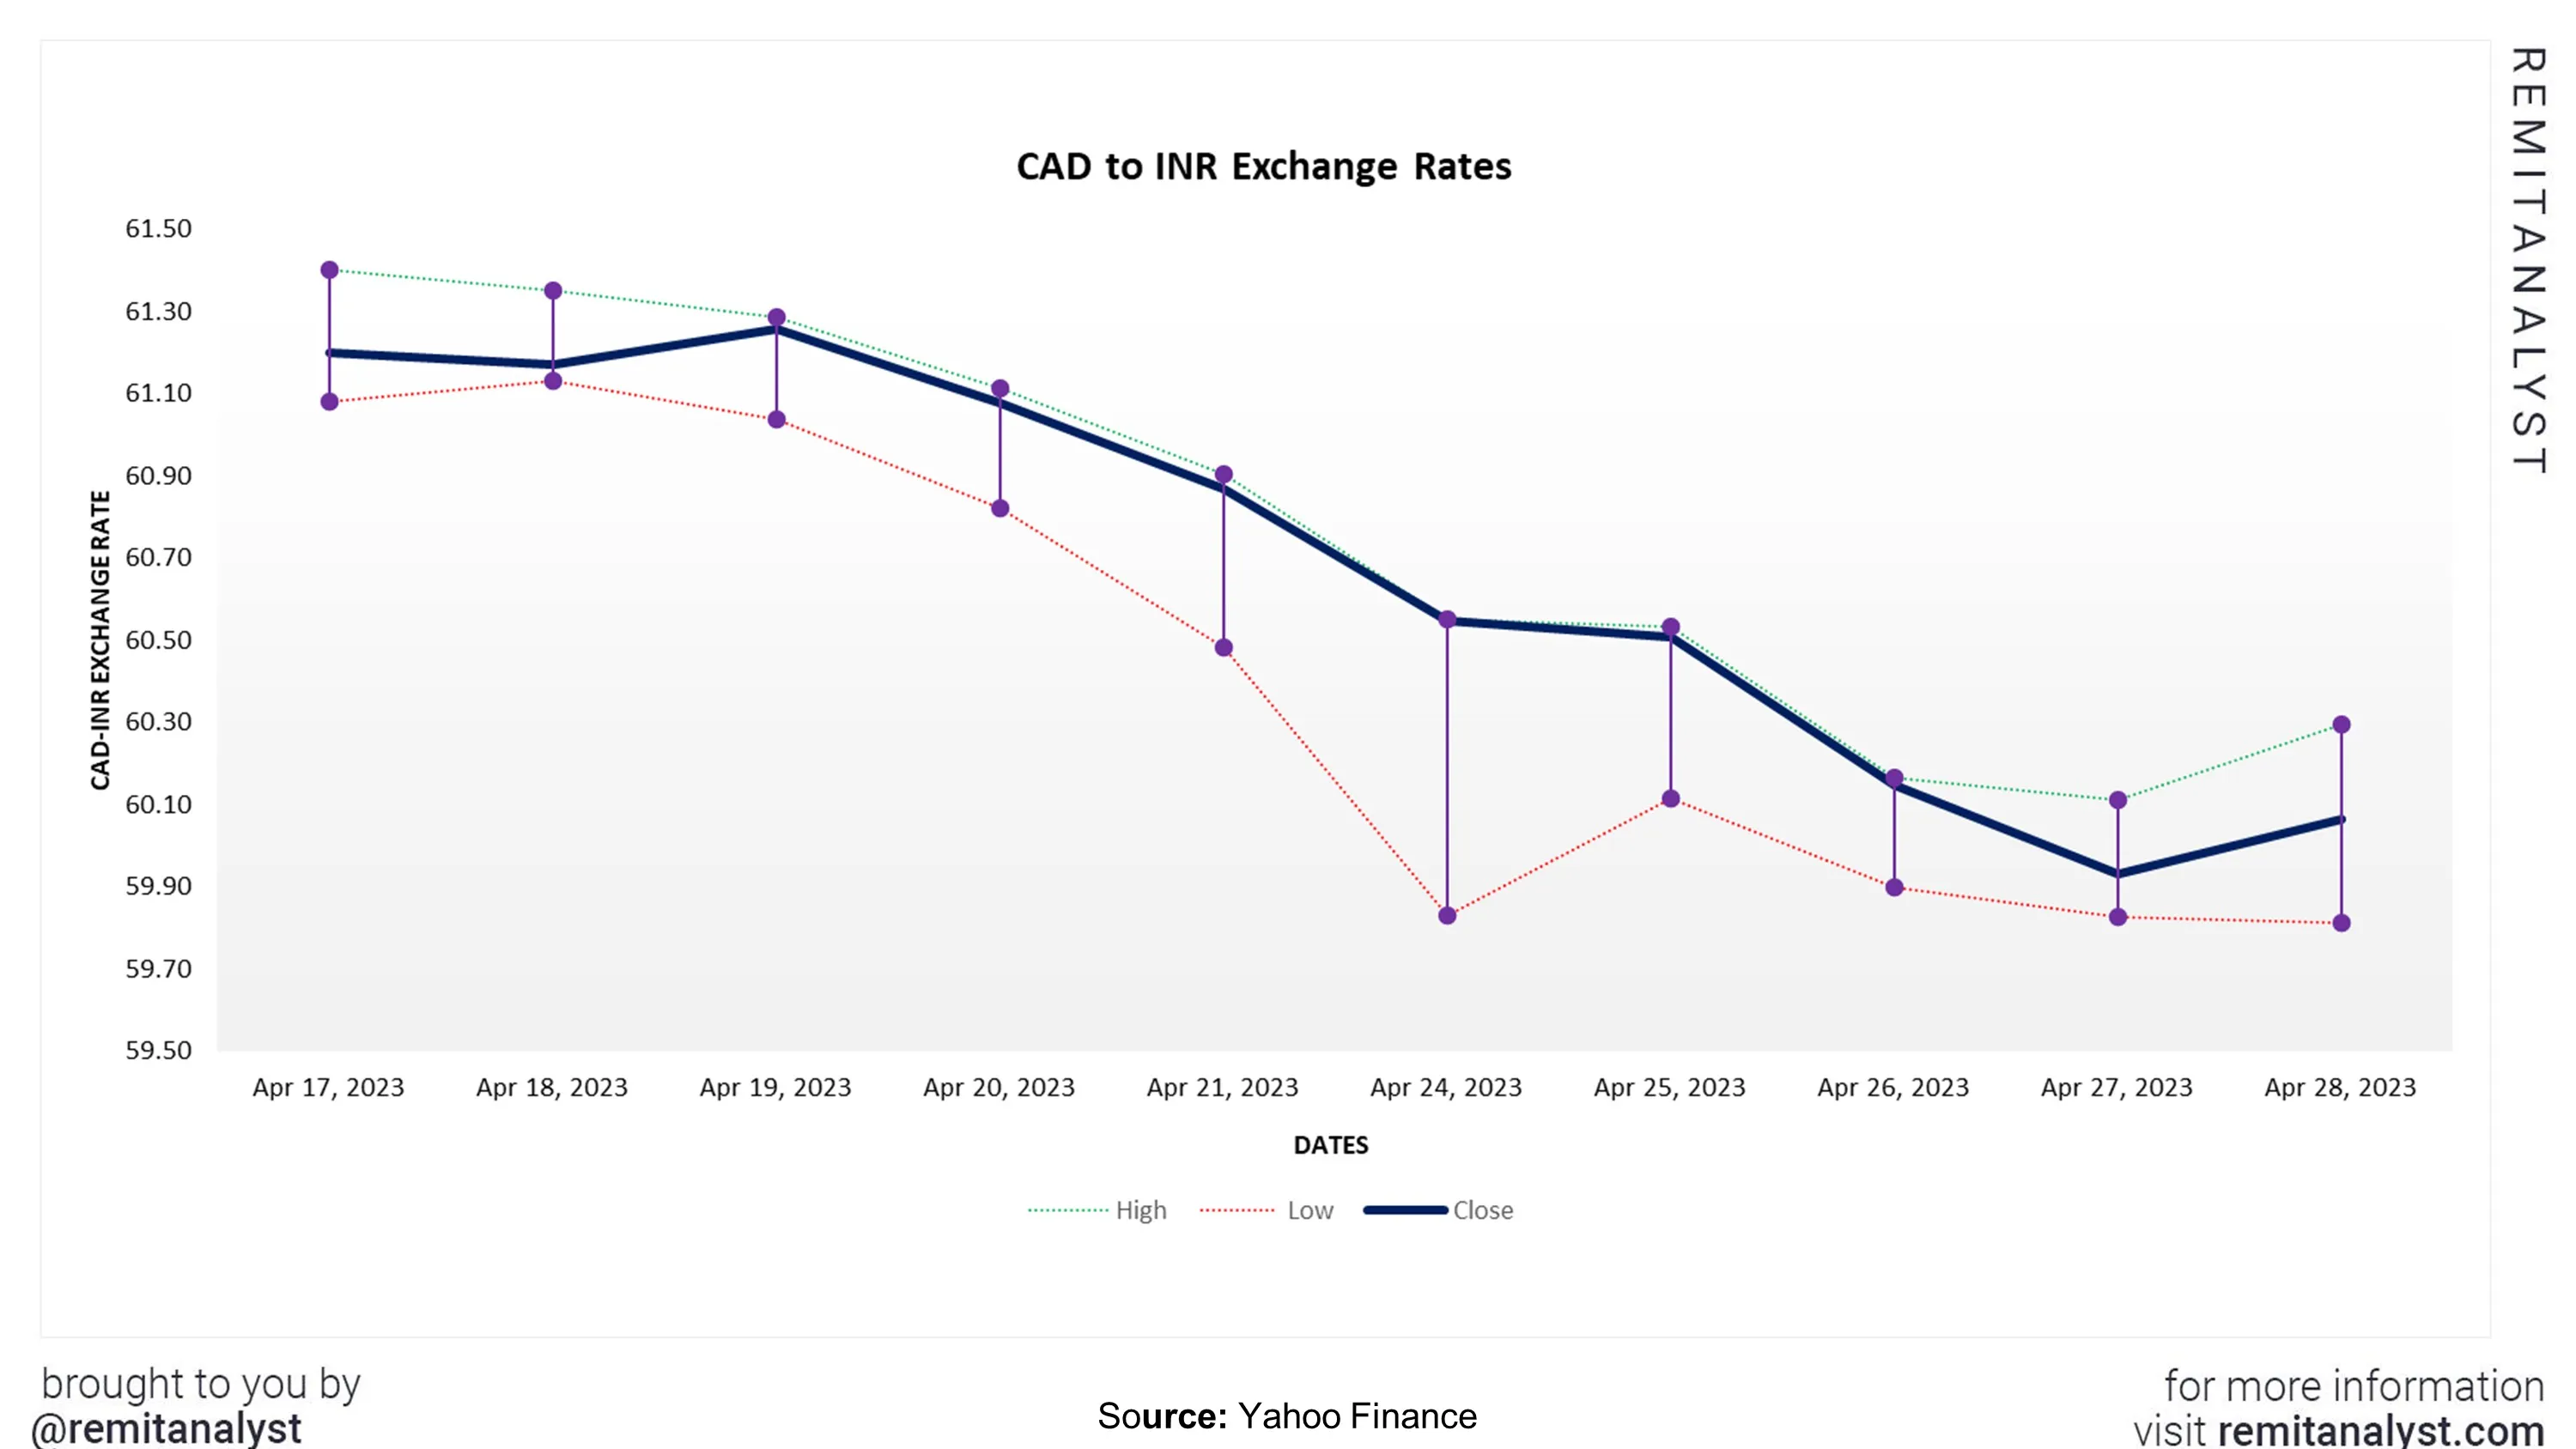 cad-to-inr-exchange-rate-from-17-apr-2023-to-28-apr-2023